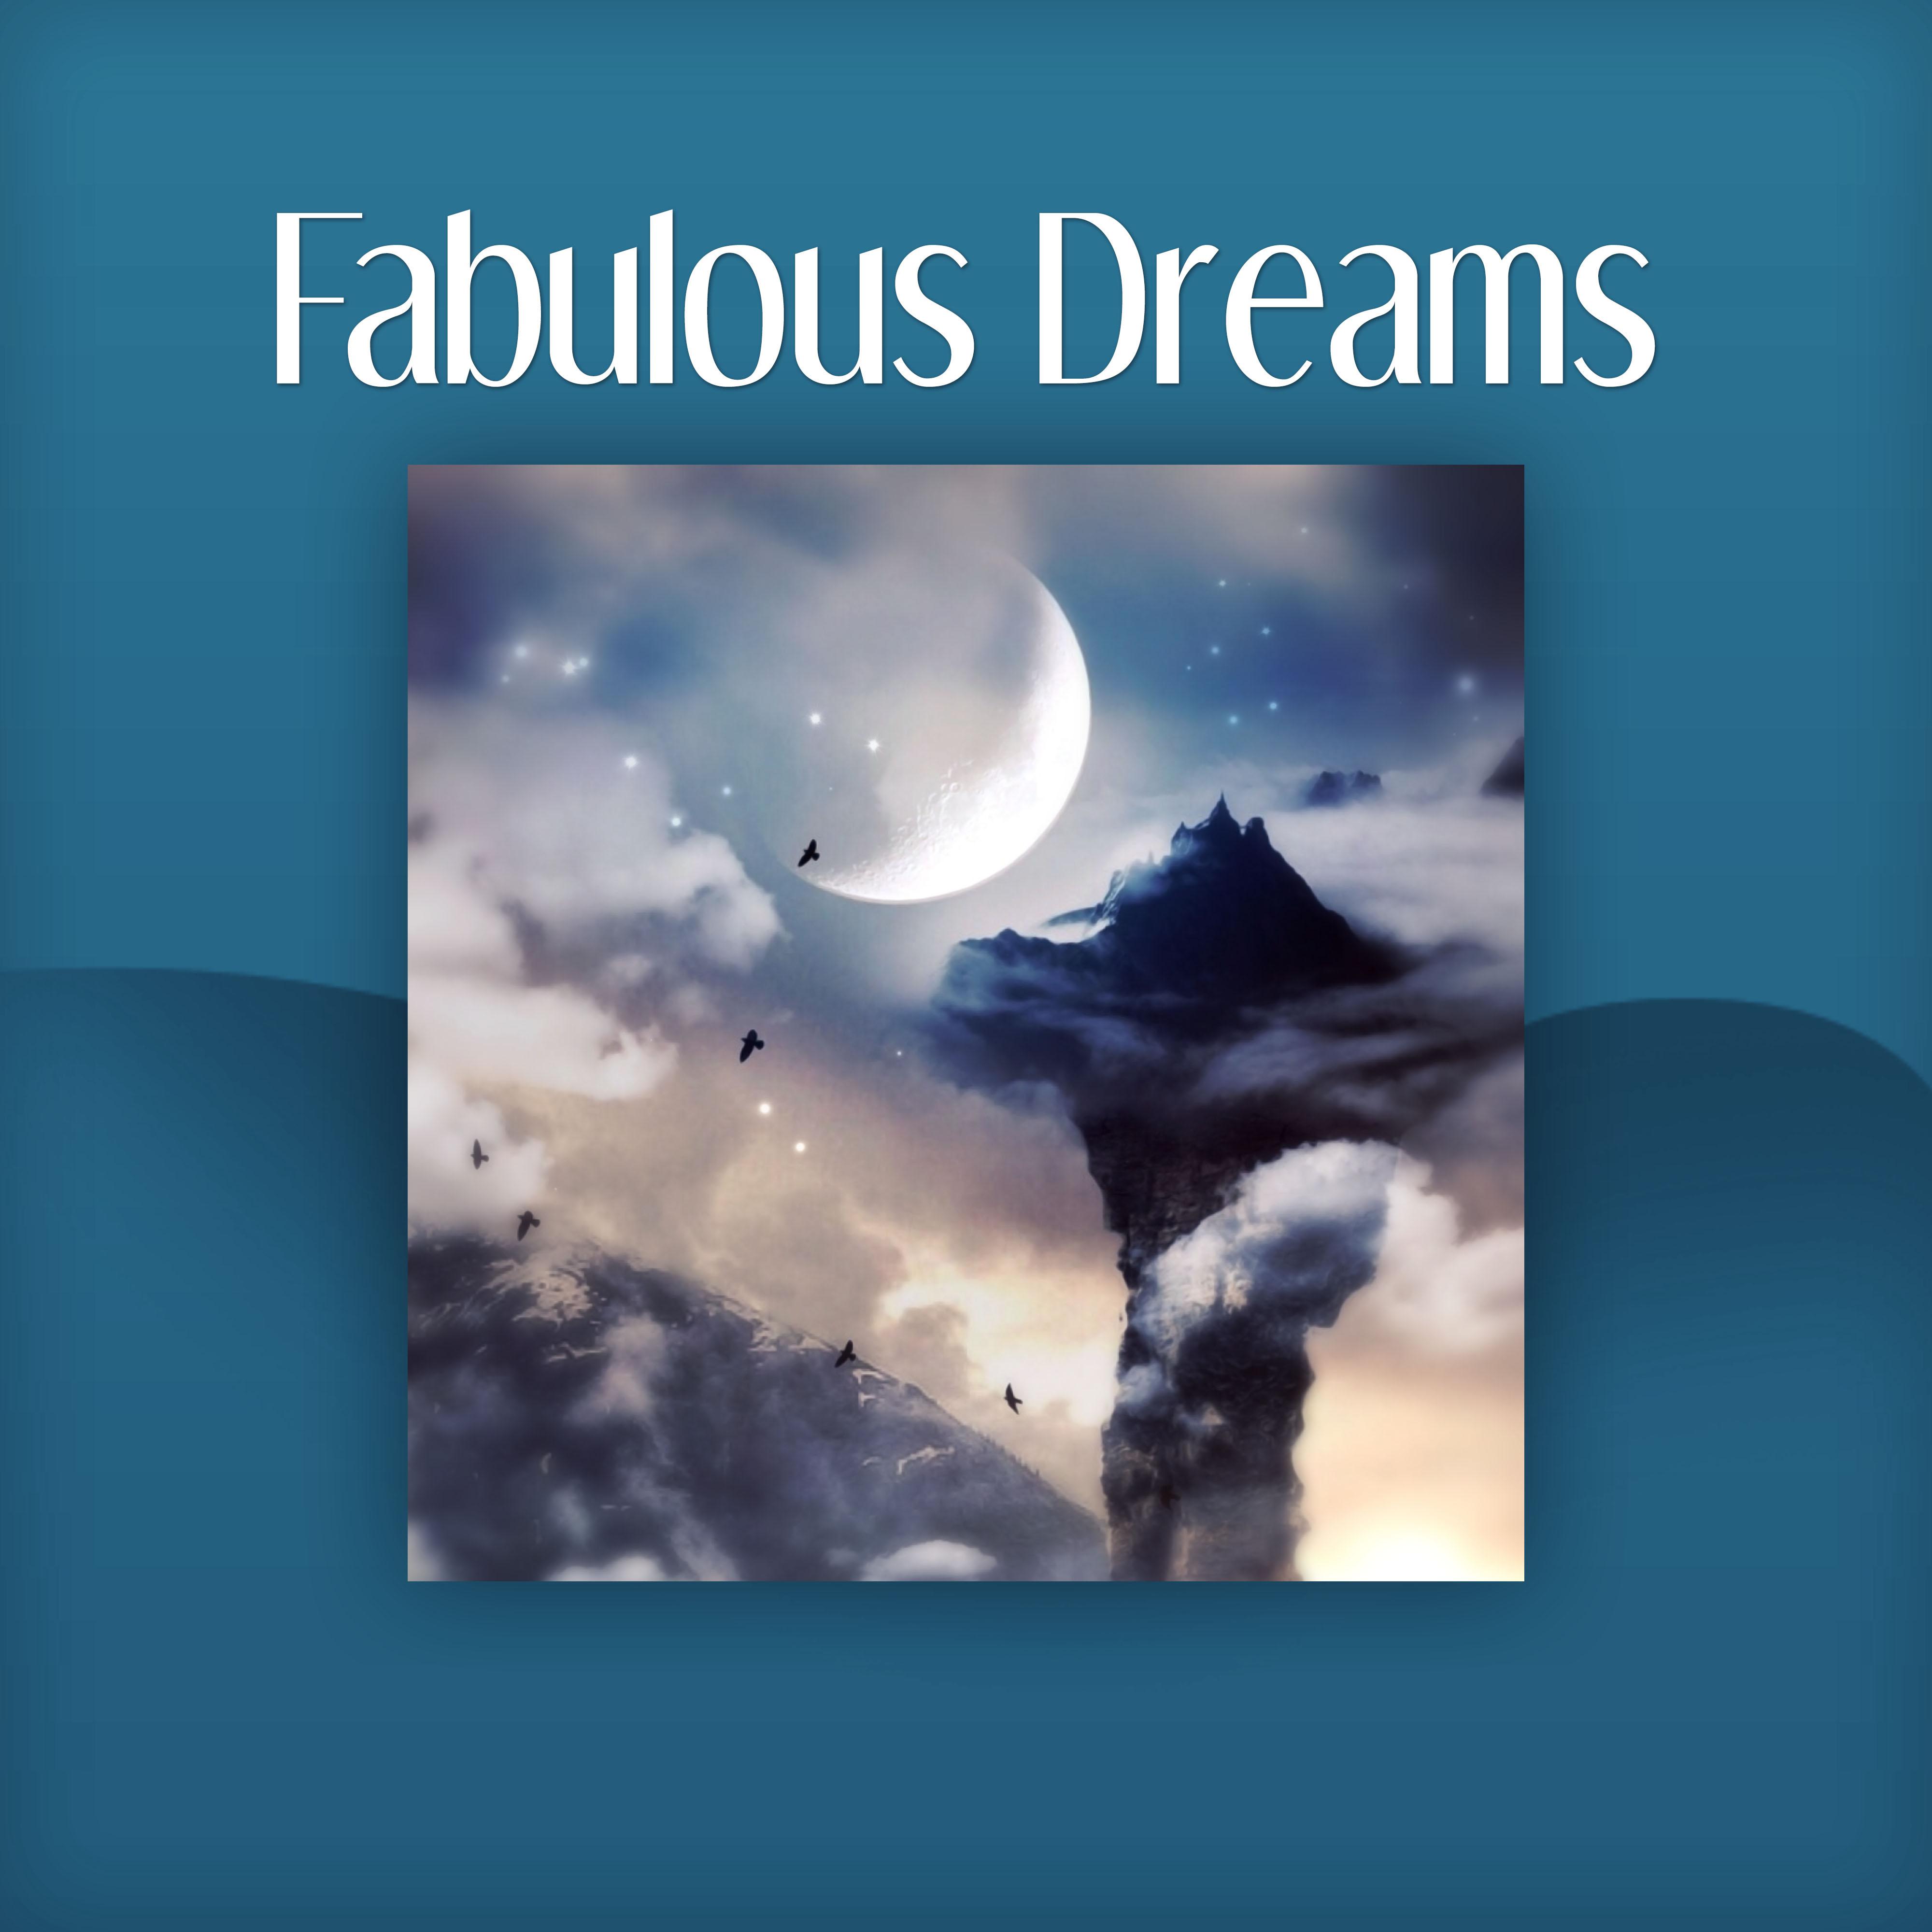 Fabulous Dreams  Fabulous Songs for Baby, Calm  Down Baby, Lullabies for Newborns, Nature Sounds to Baby Massage, Relieve Stress, Help Your Baby Sleep Through the Night